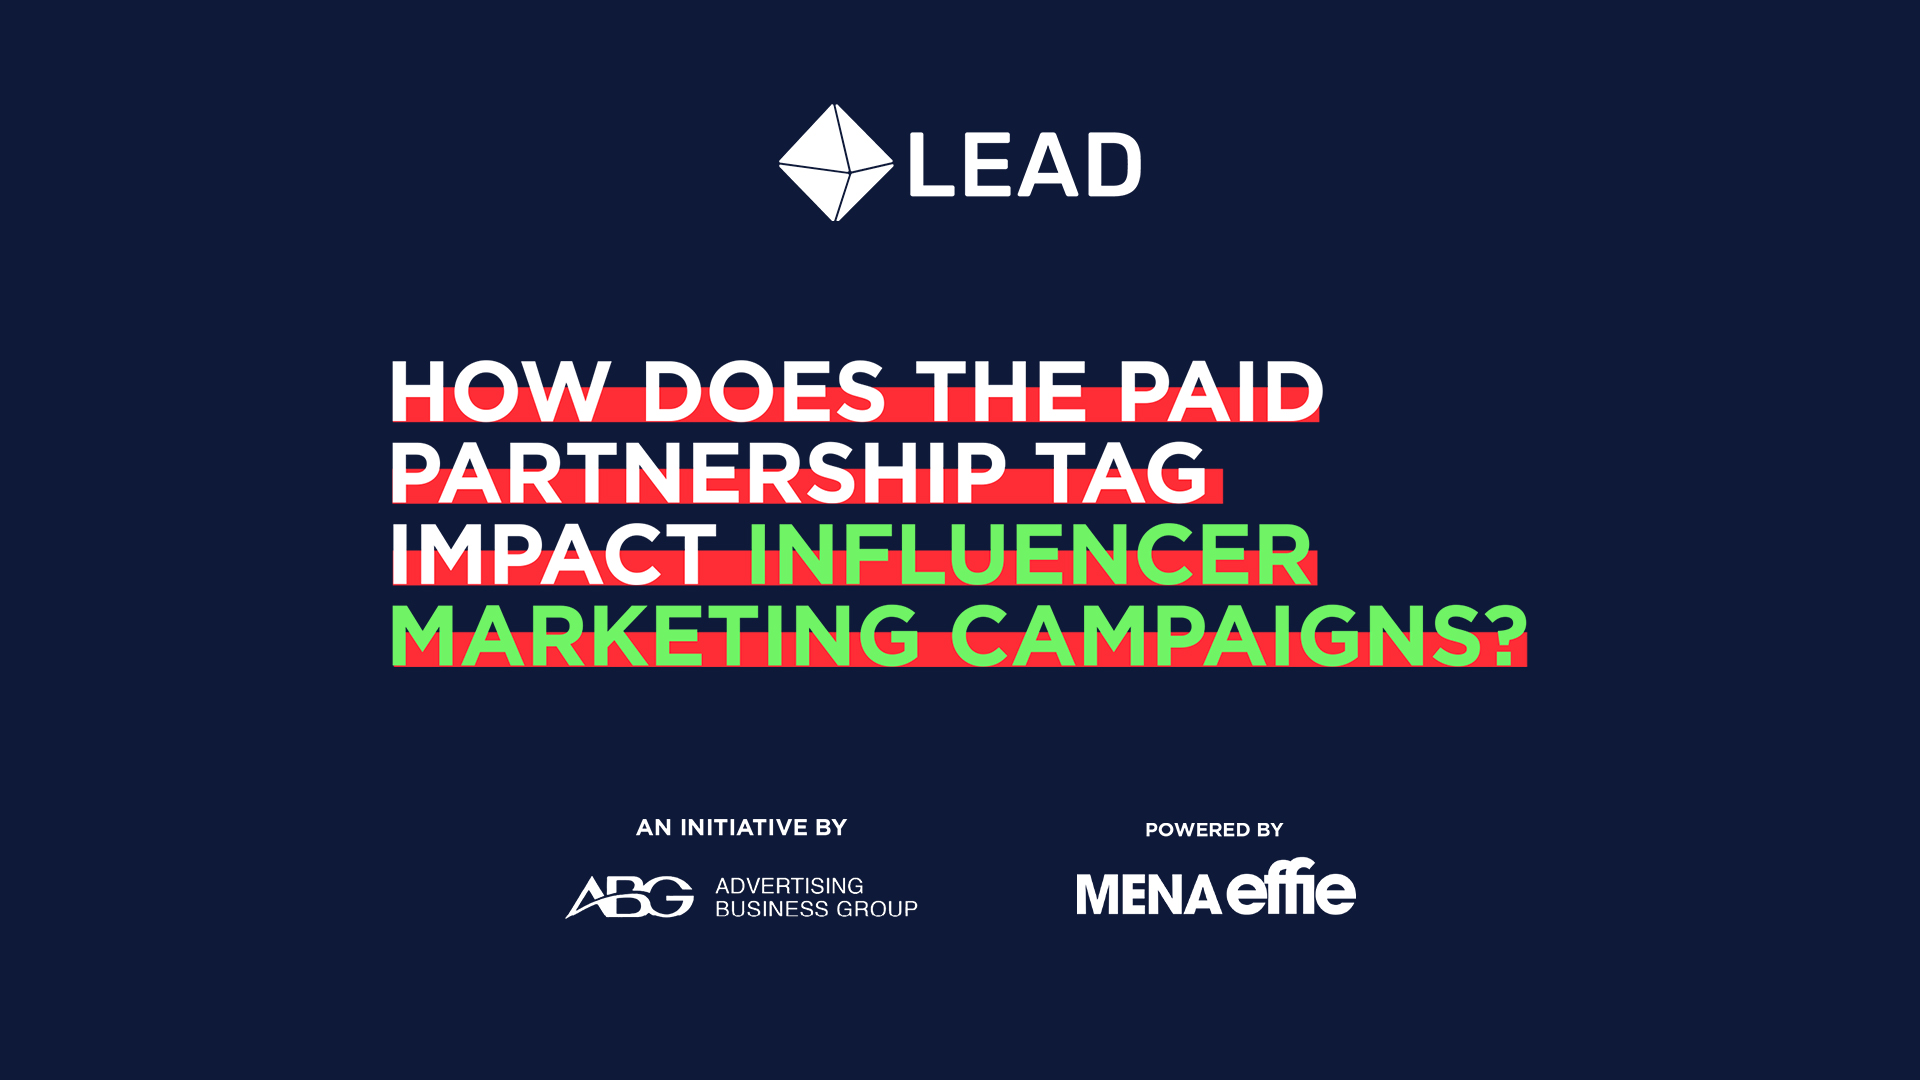 How Does the Paid Partnership Tag Impact Influencer Marketing Campaigns?